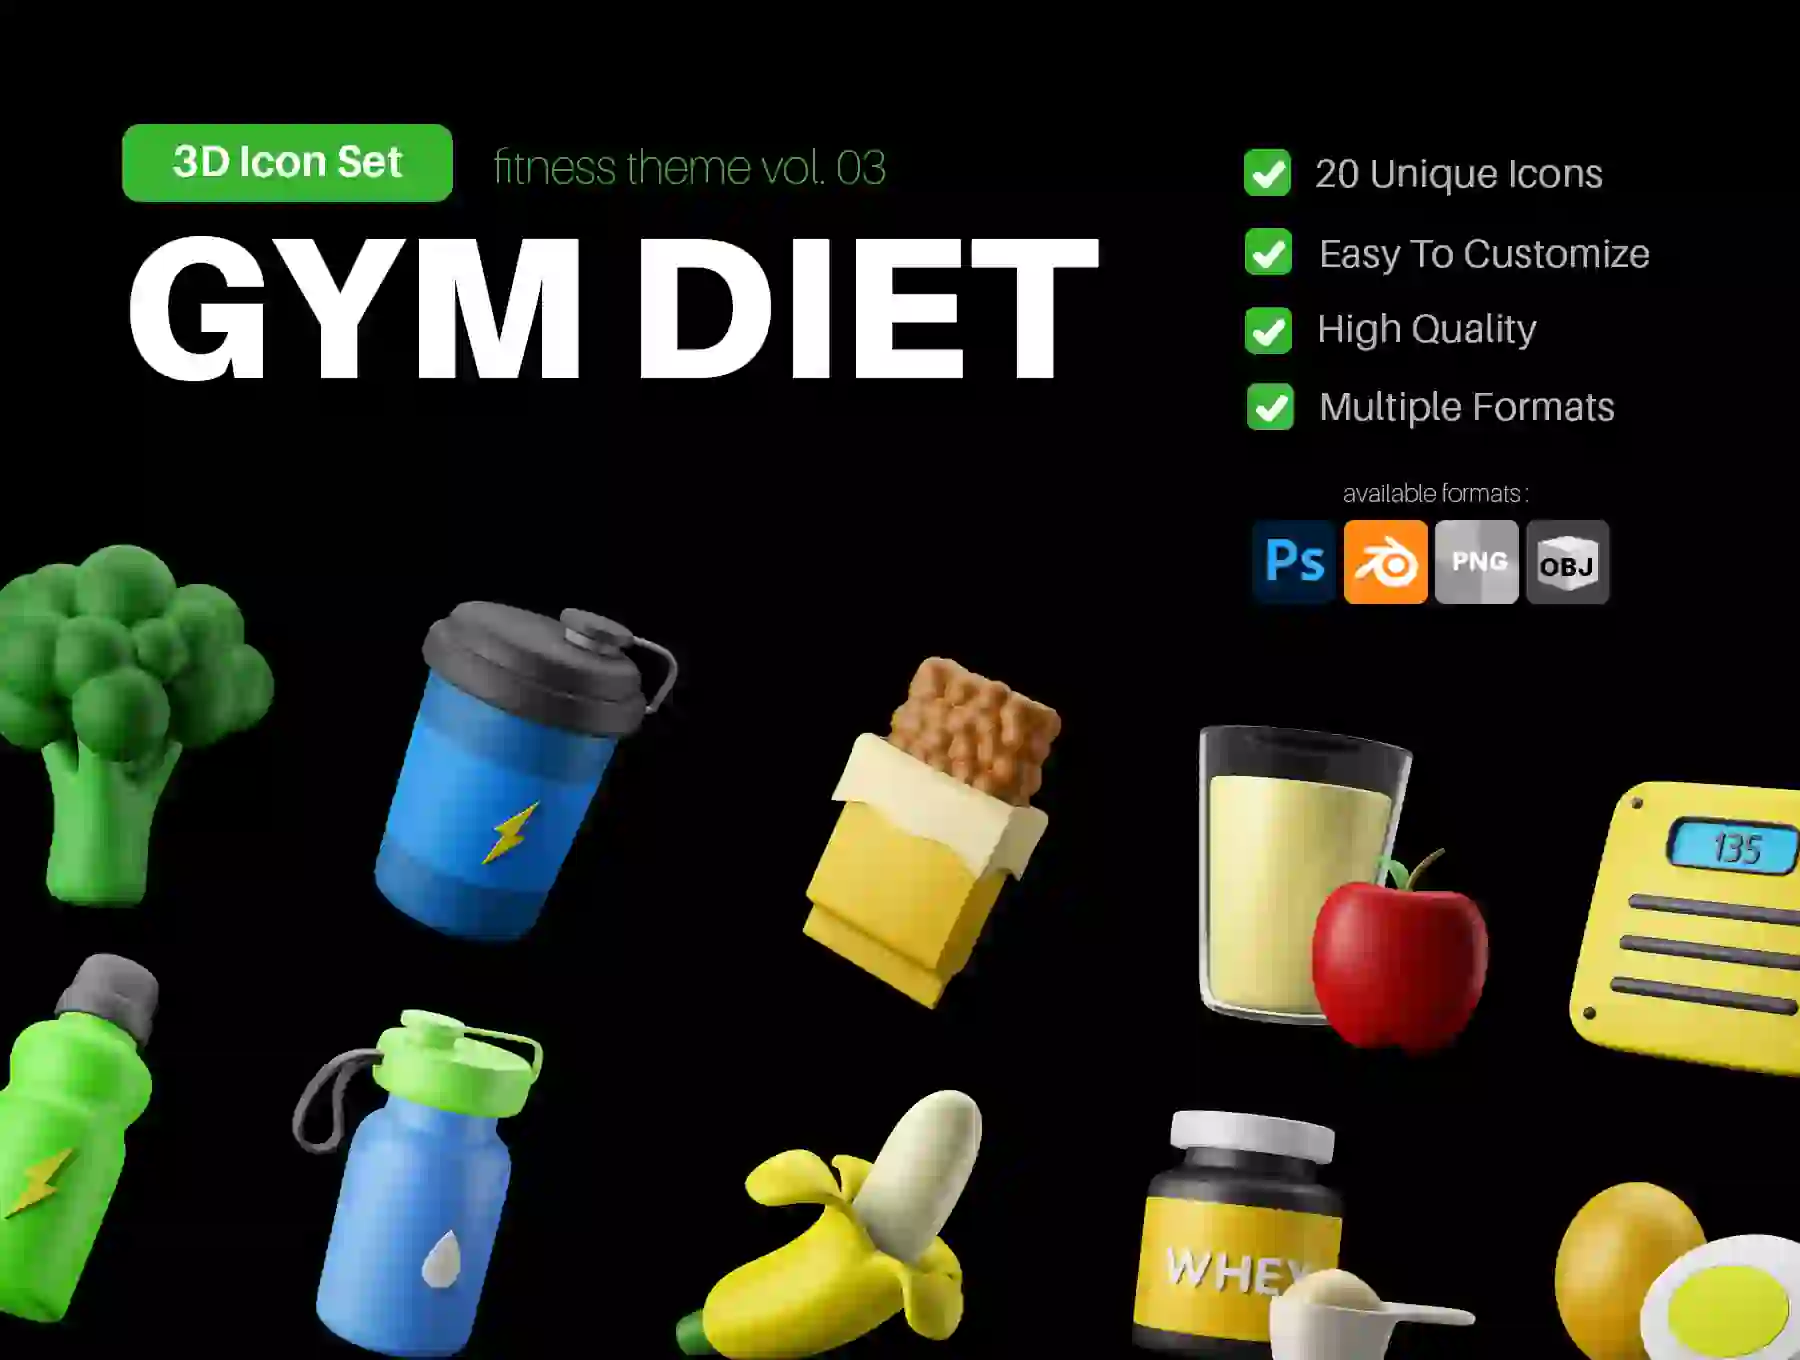 3D Icon Set - Fitness And Gym Diet Theme